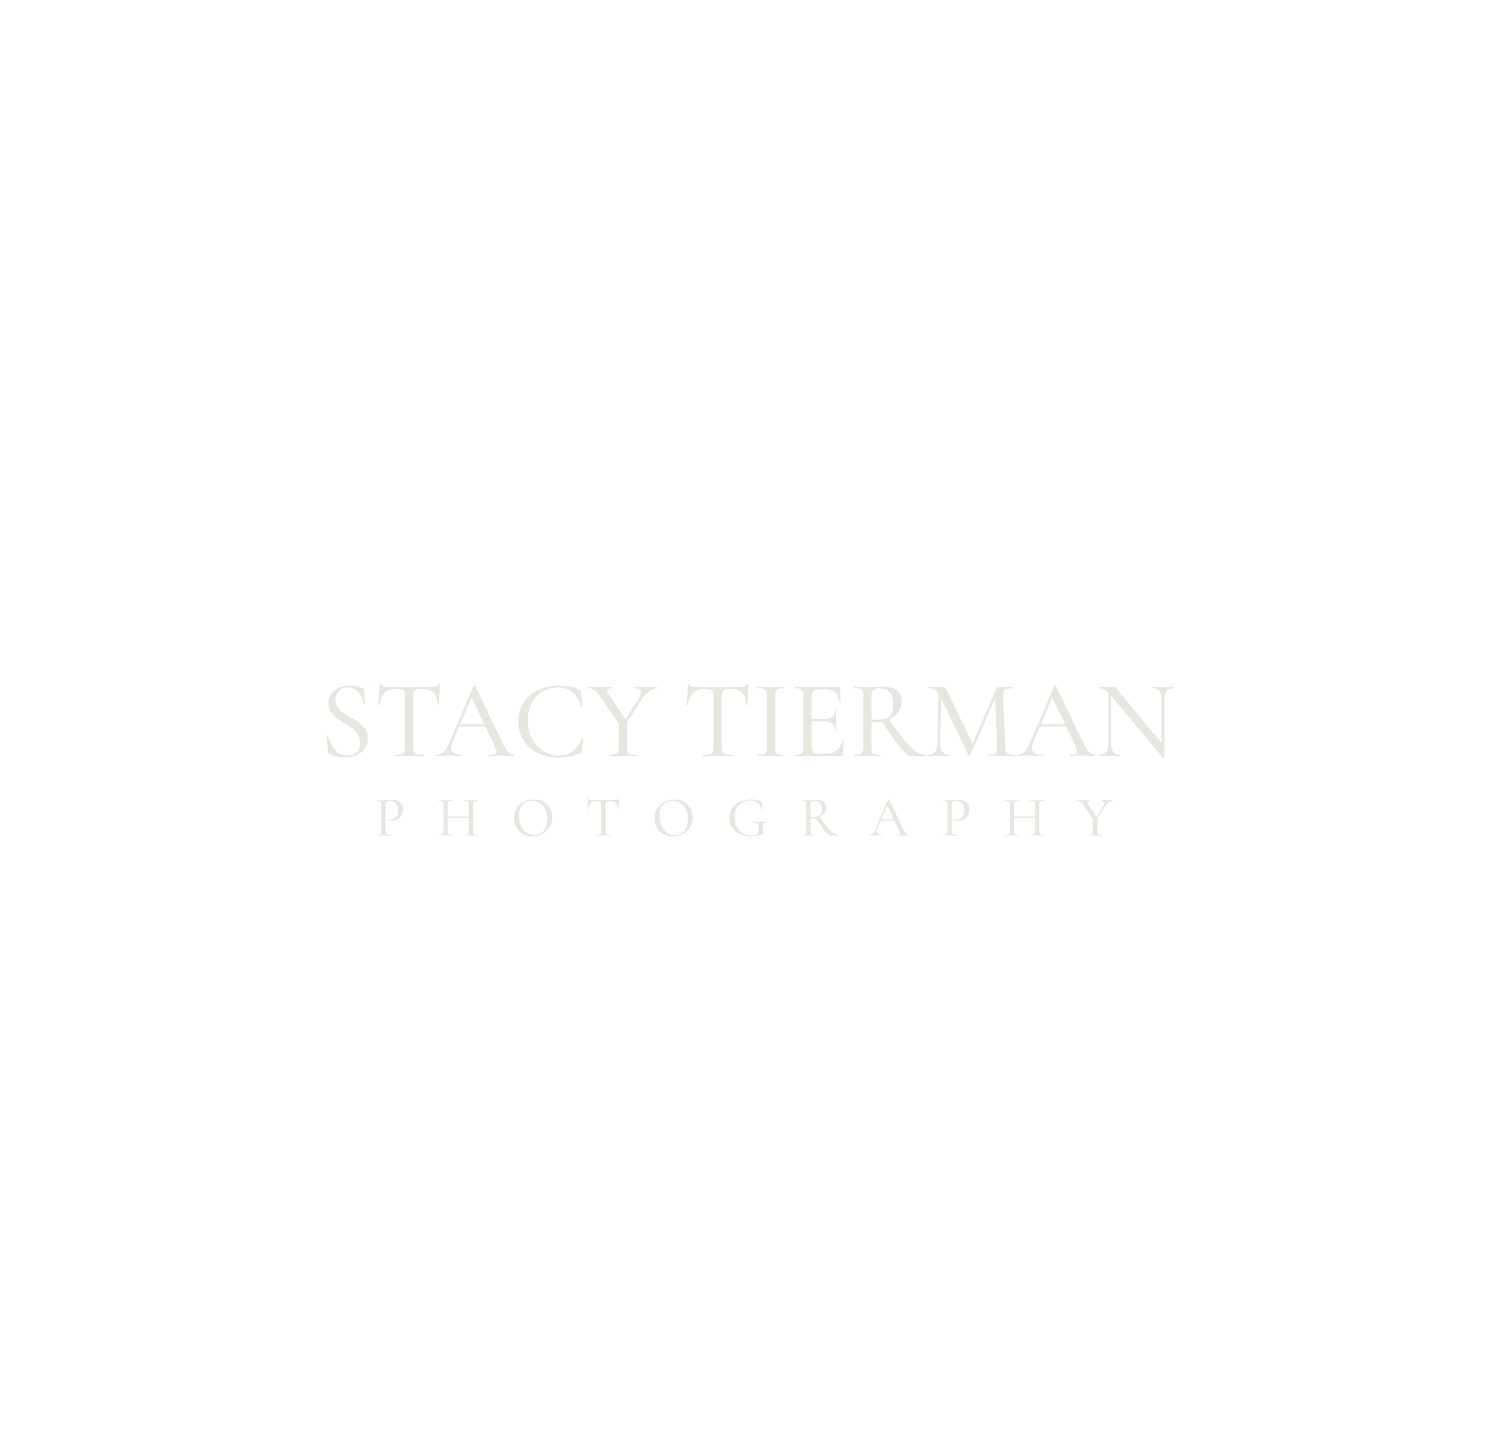 Stacy Tierman Photography